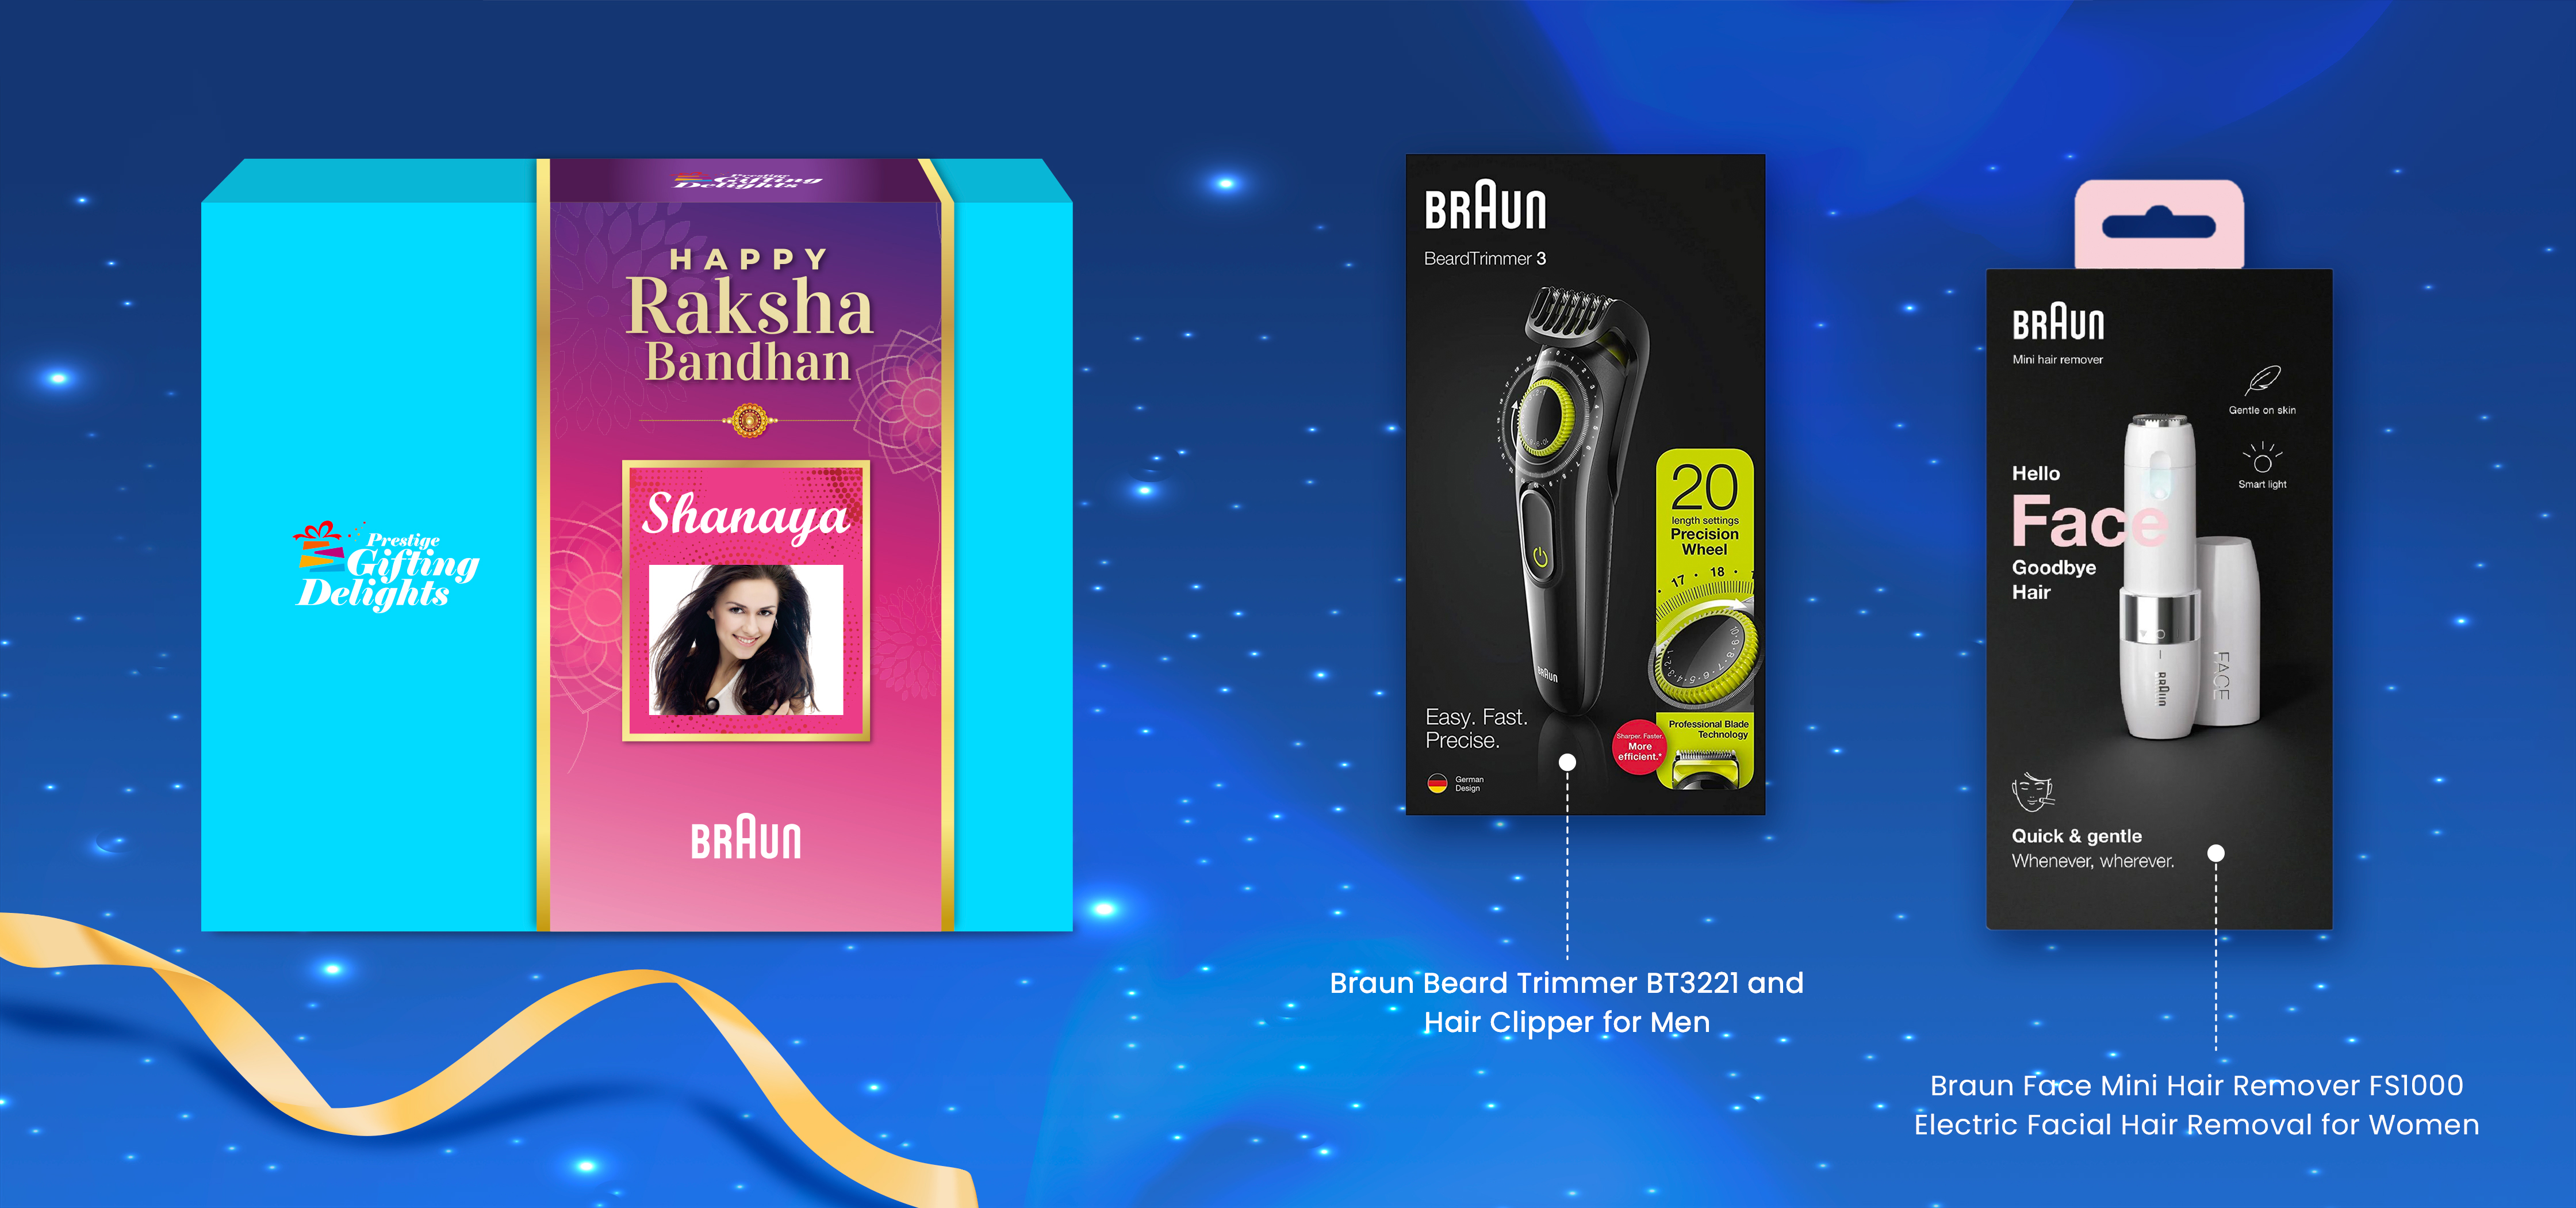 Braun Trimmers Rakhi Gift Set For The Couple